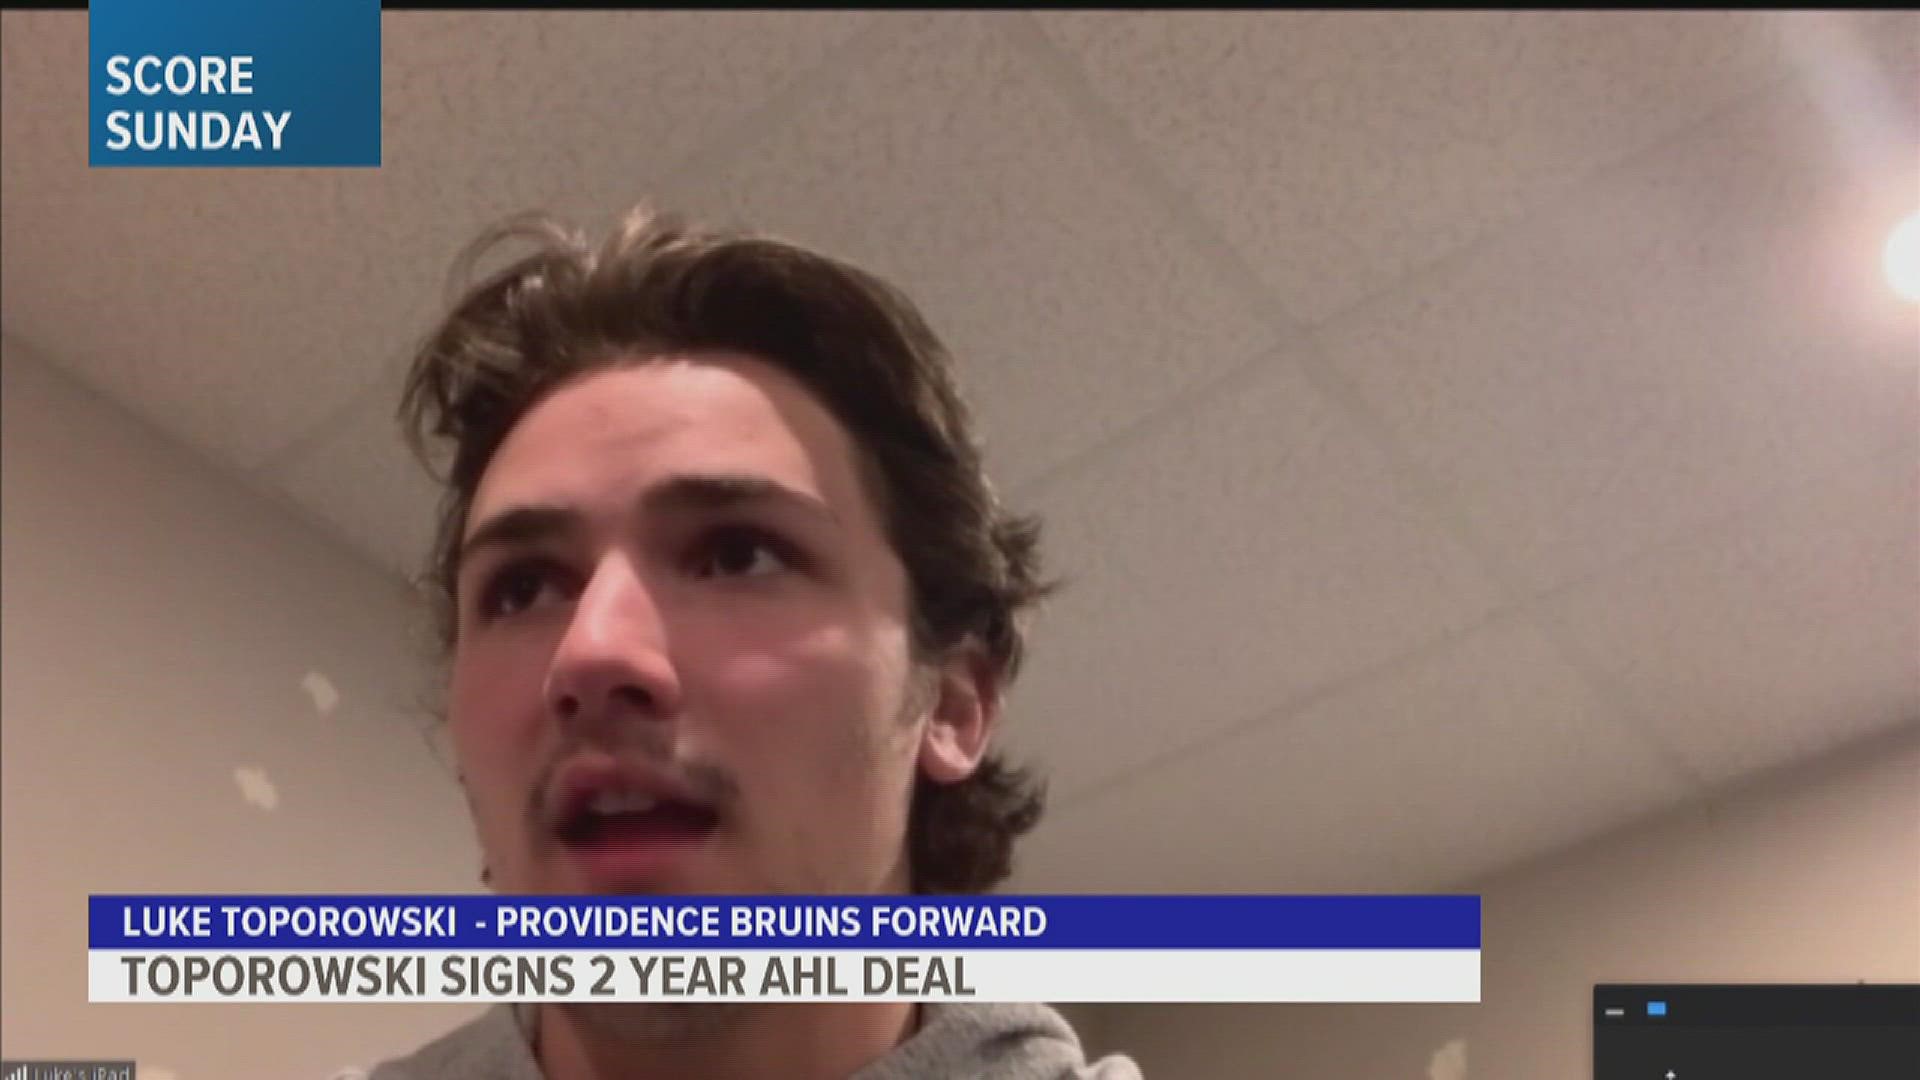 The Bettendorf native is the first Quad Citizen to sign a professional hockey contract.